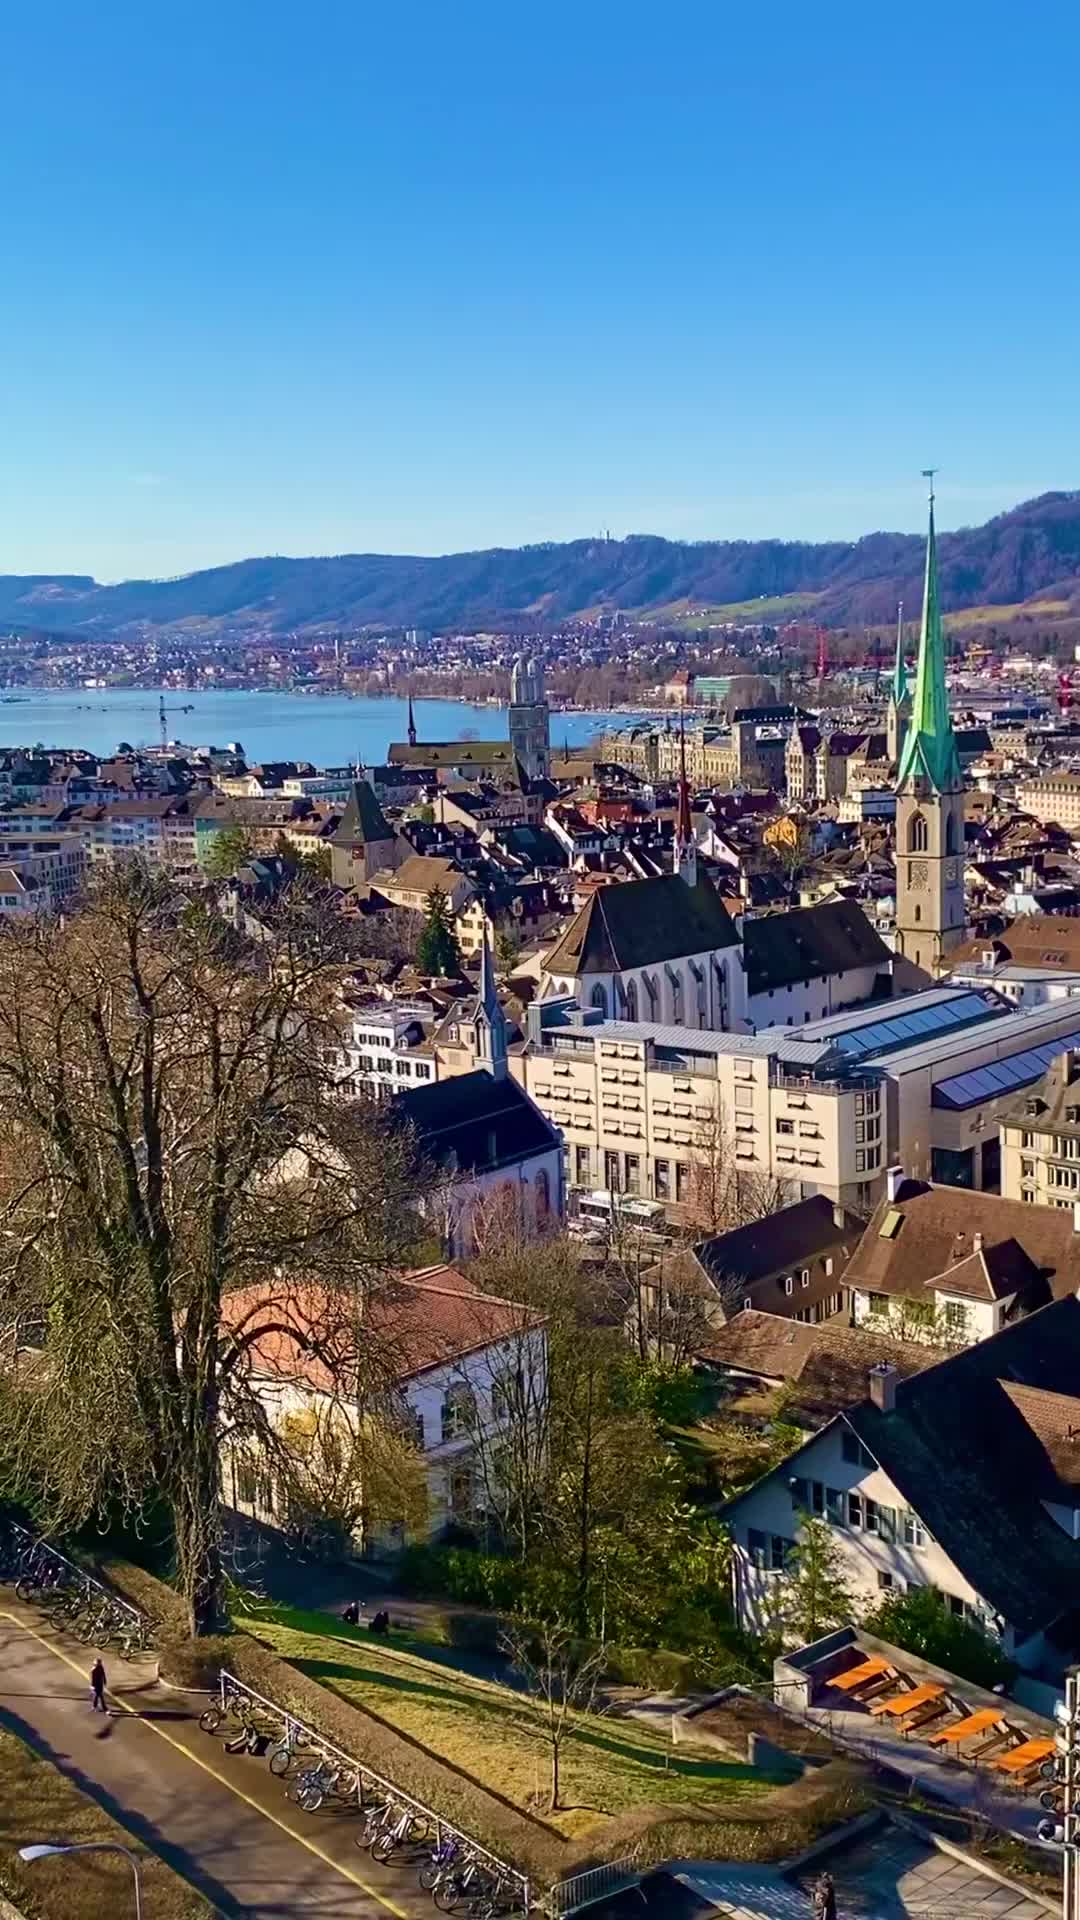 Mid-March in Zurich: Blossoms & Scenic Views